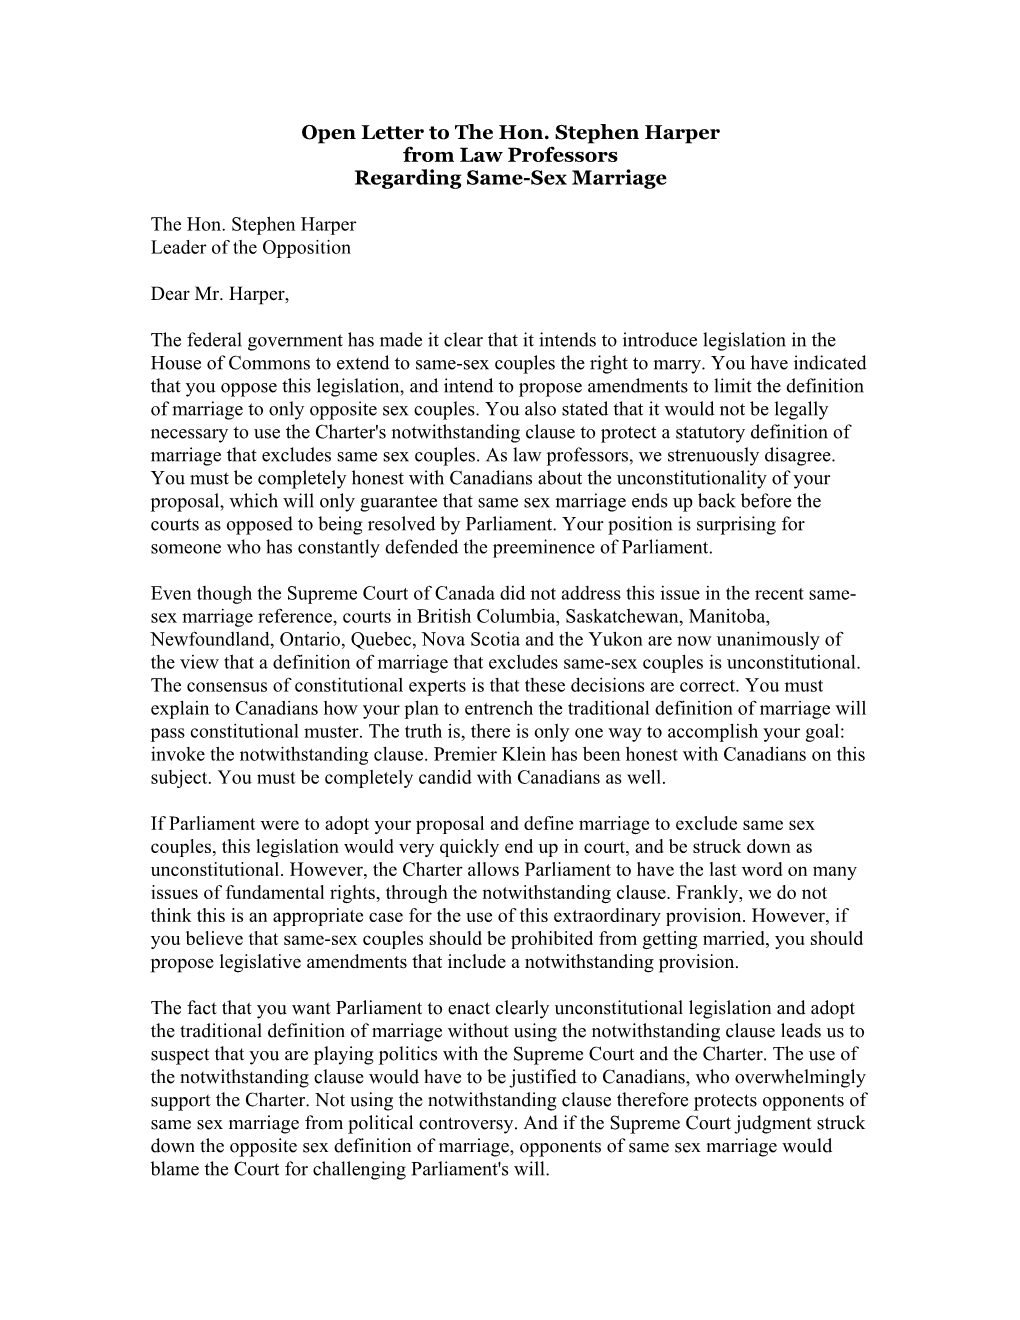 Open Letter to the Hon. Stephen Harper from Law Professors Regarding Same-Sex Marriage the Hon. Stephen Harper Leader of the Op